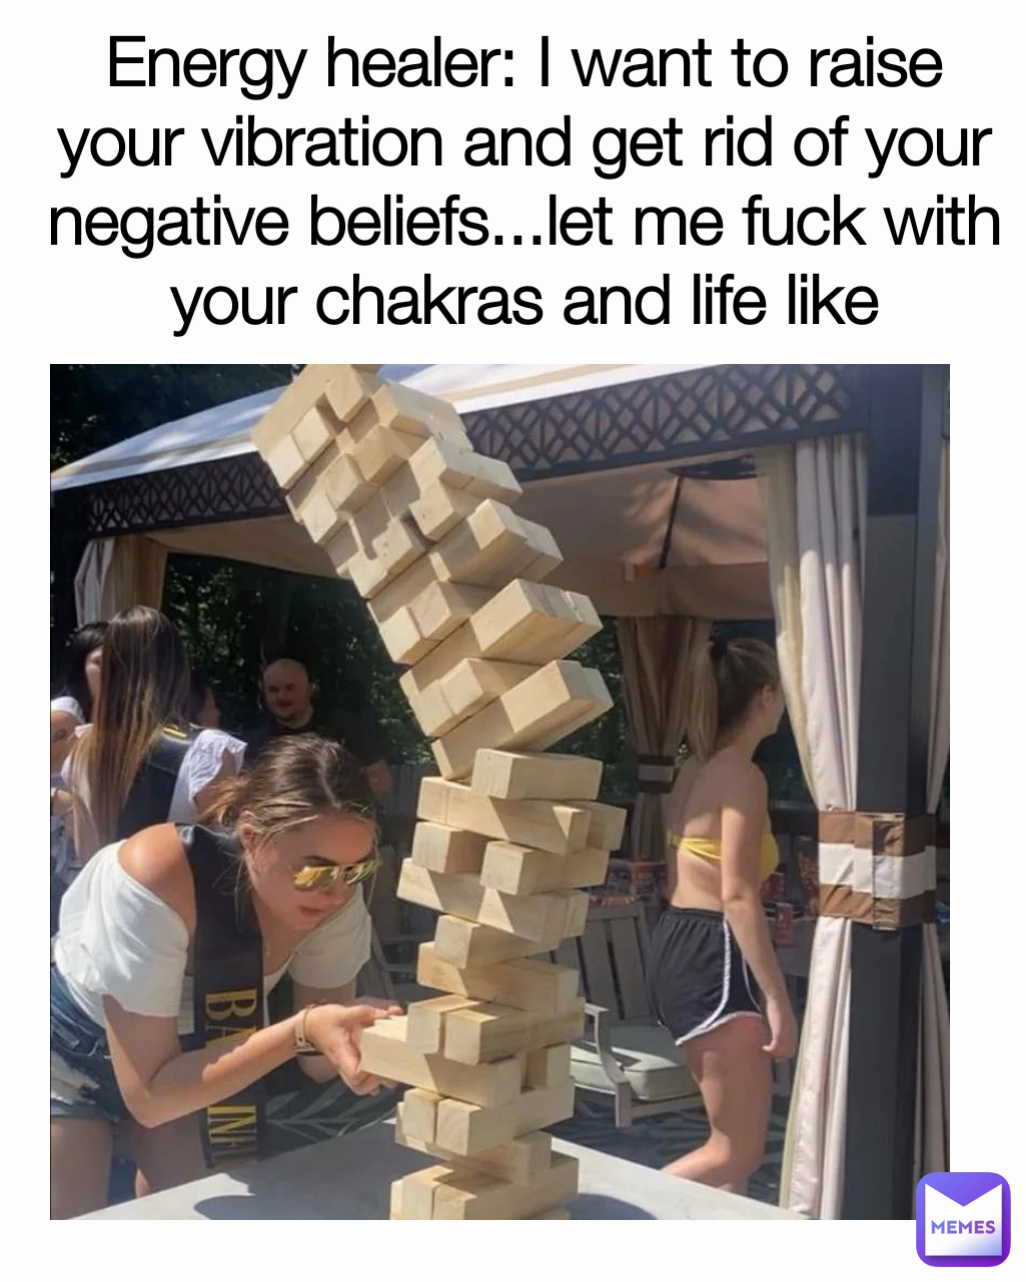 Energy healer: I want to raise your vibration and get rid of your negative beliefs...let me fuck with your chakras and life like